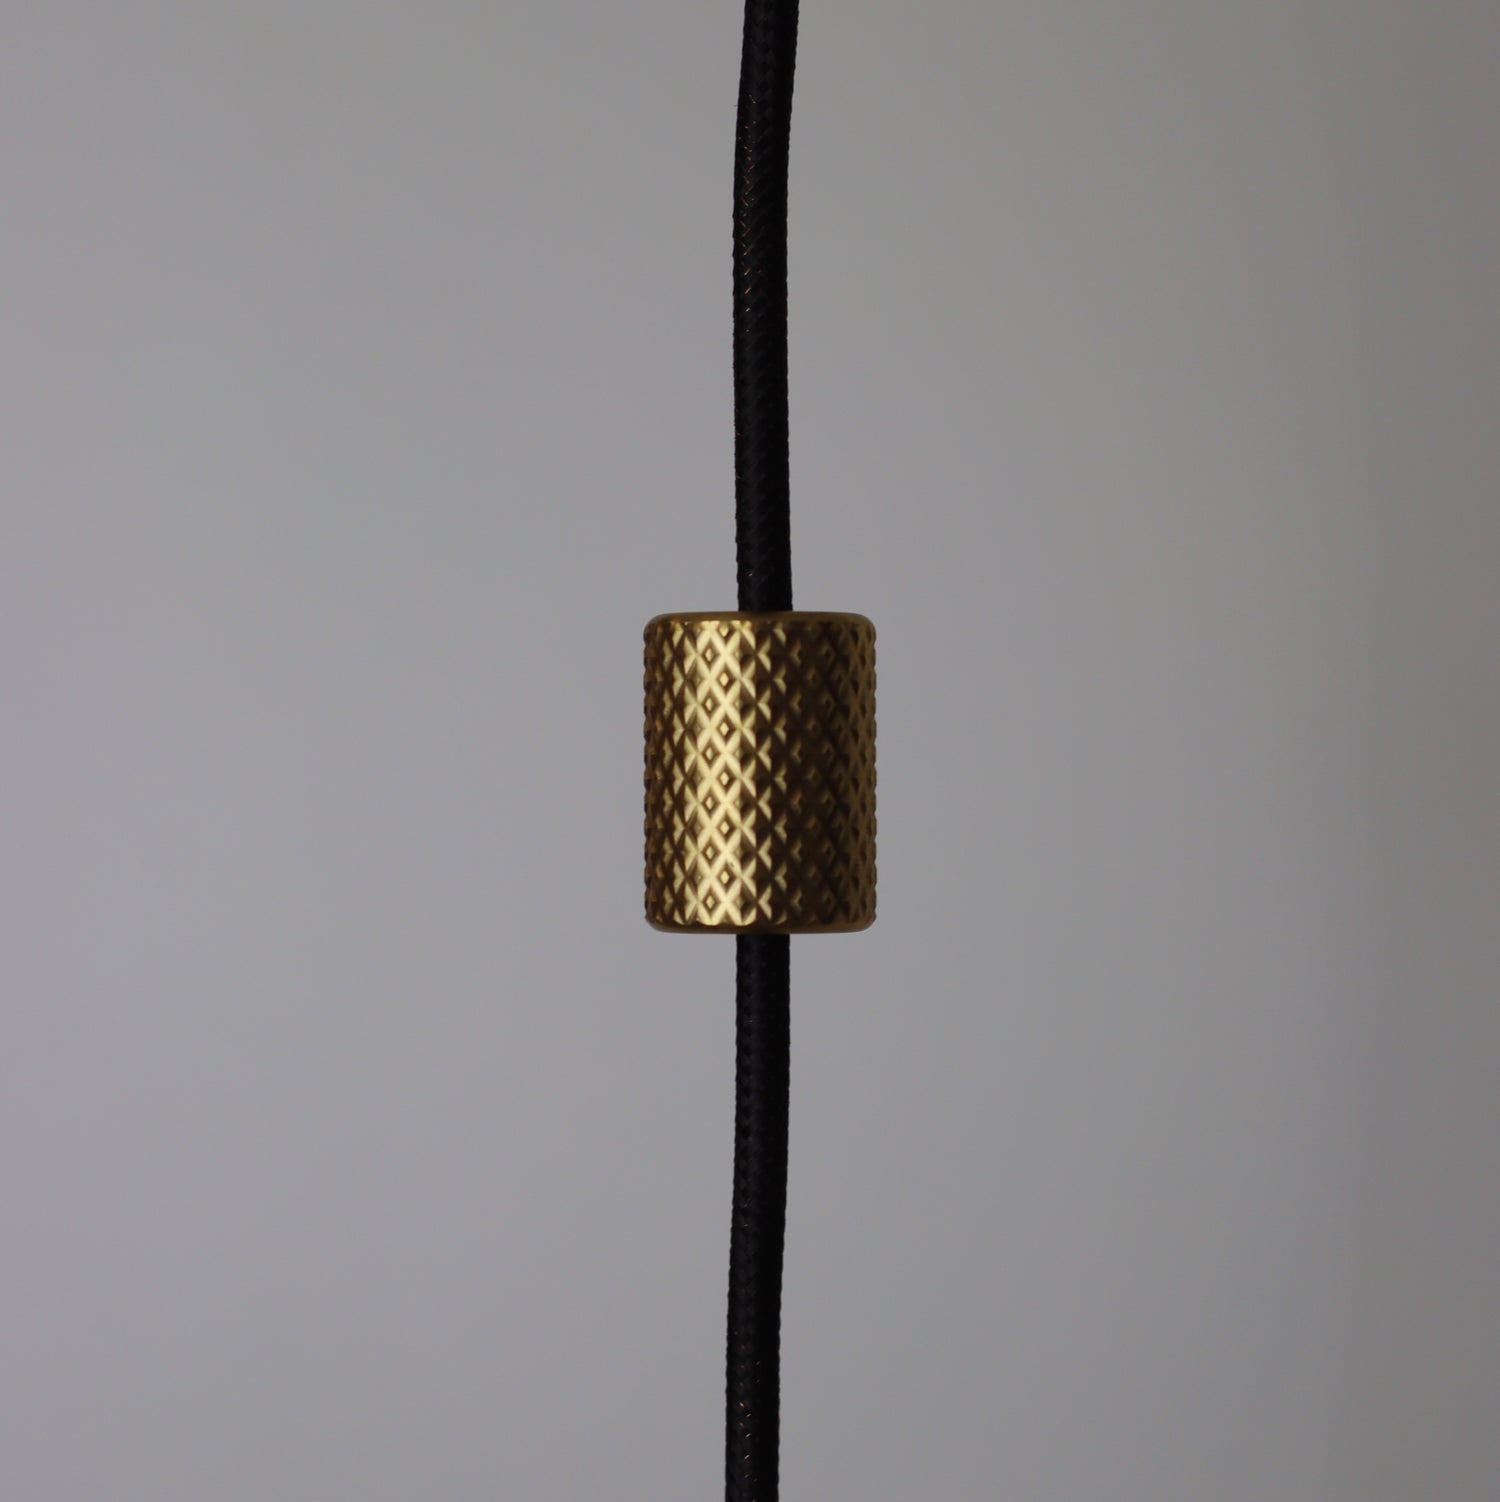 solid brass knurled light ceiling weight. pendant light for domestic